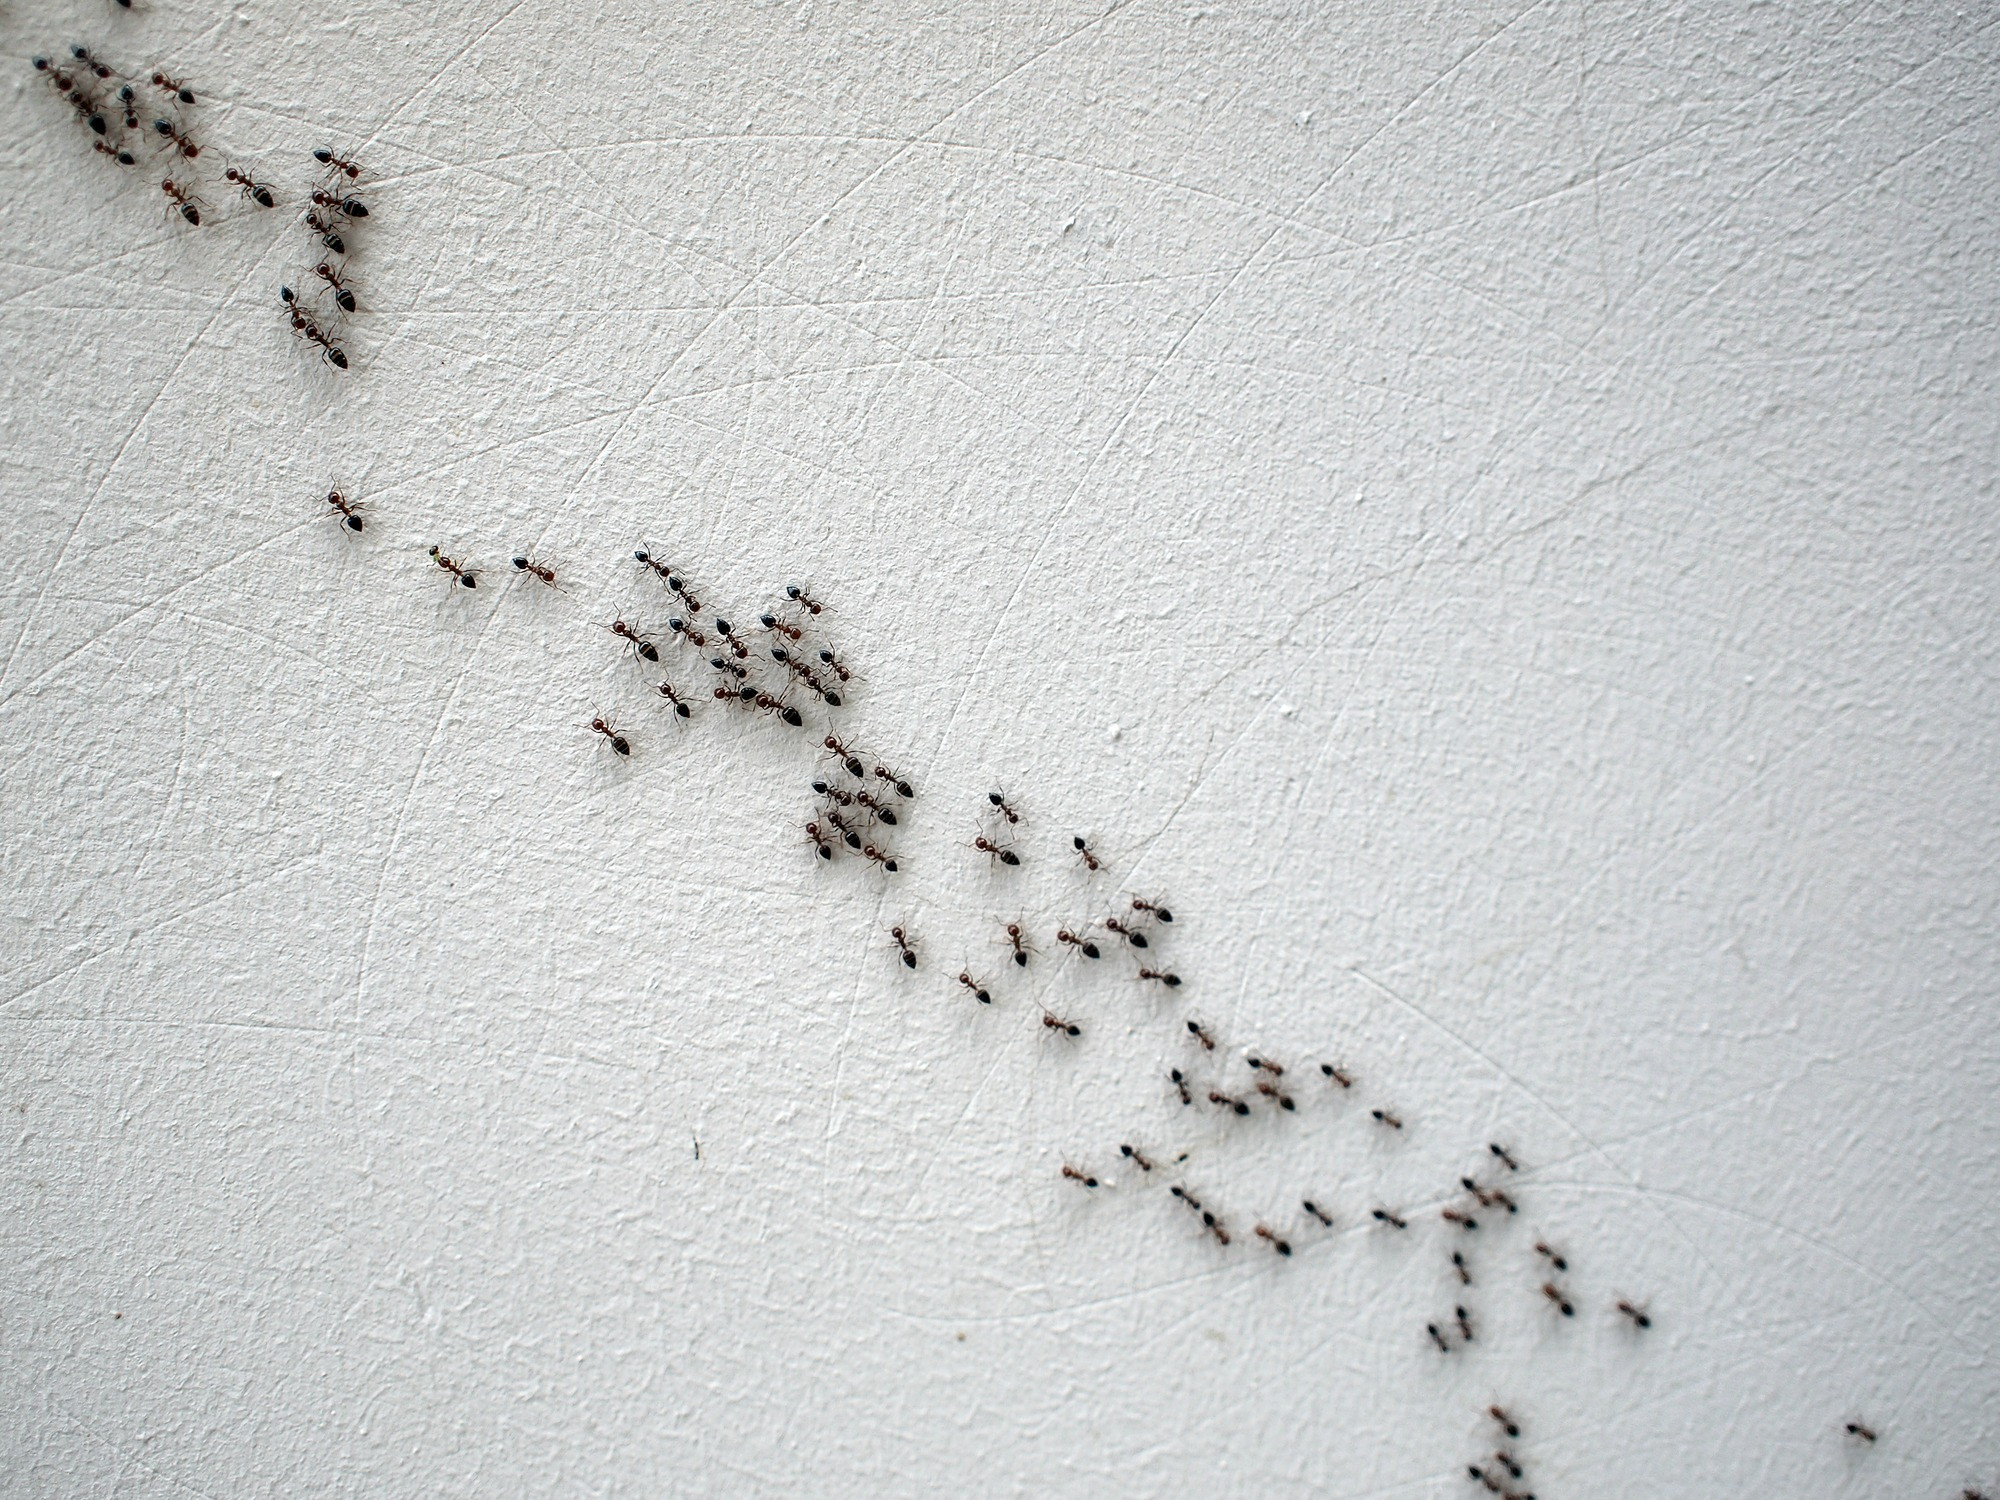 tiny ants in living room